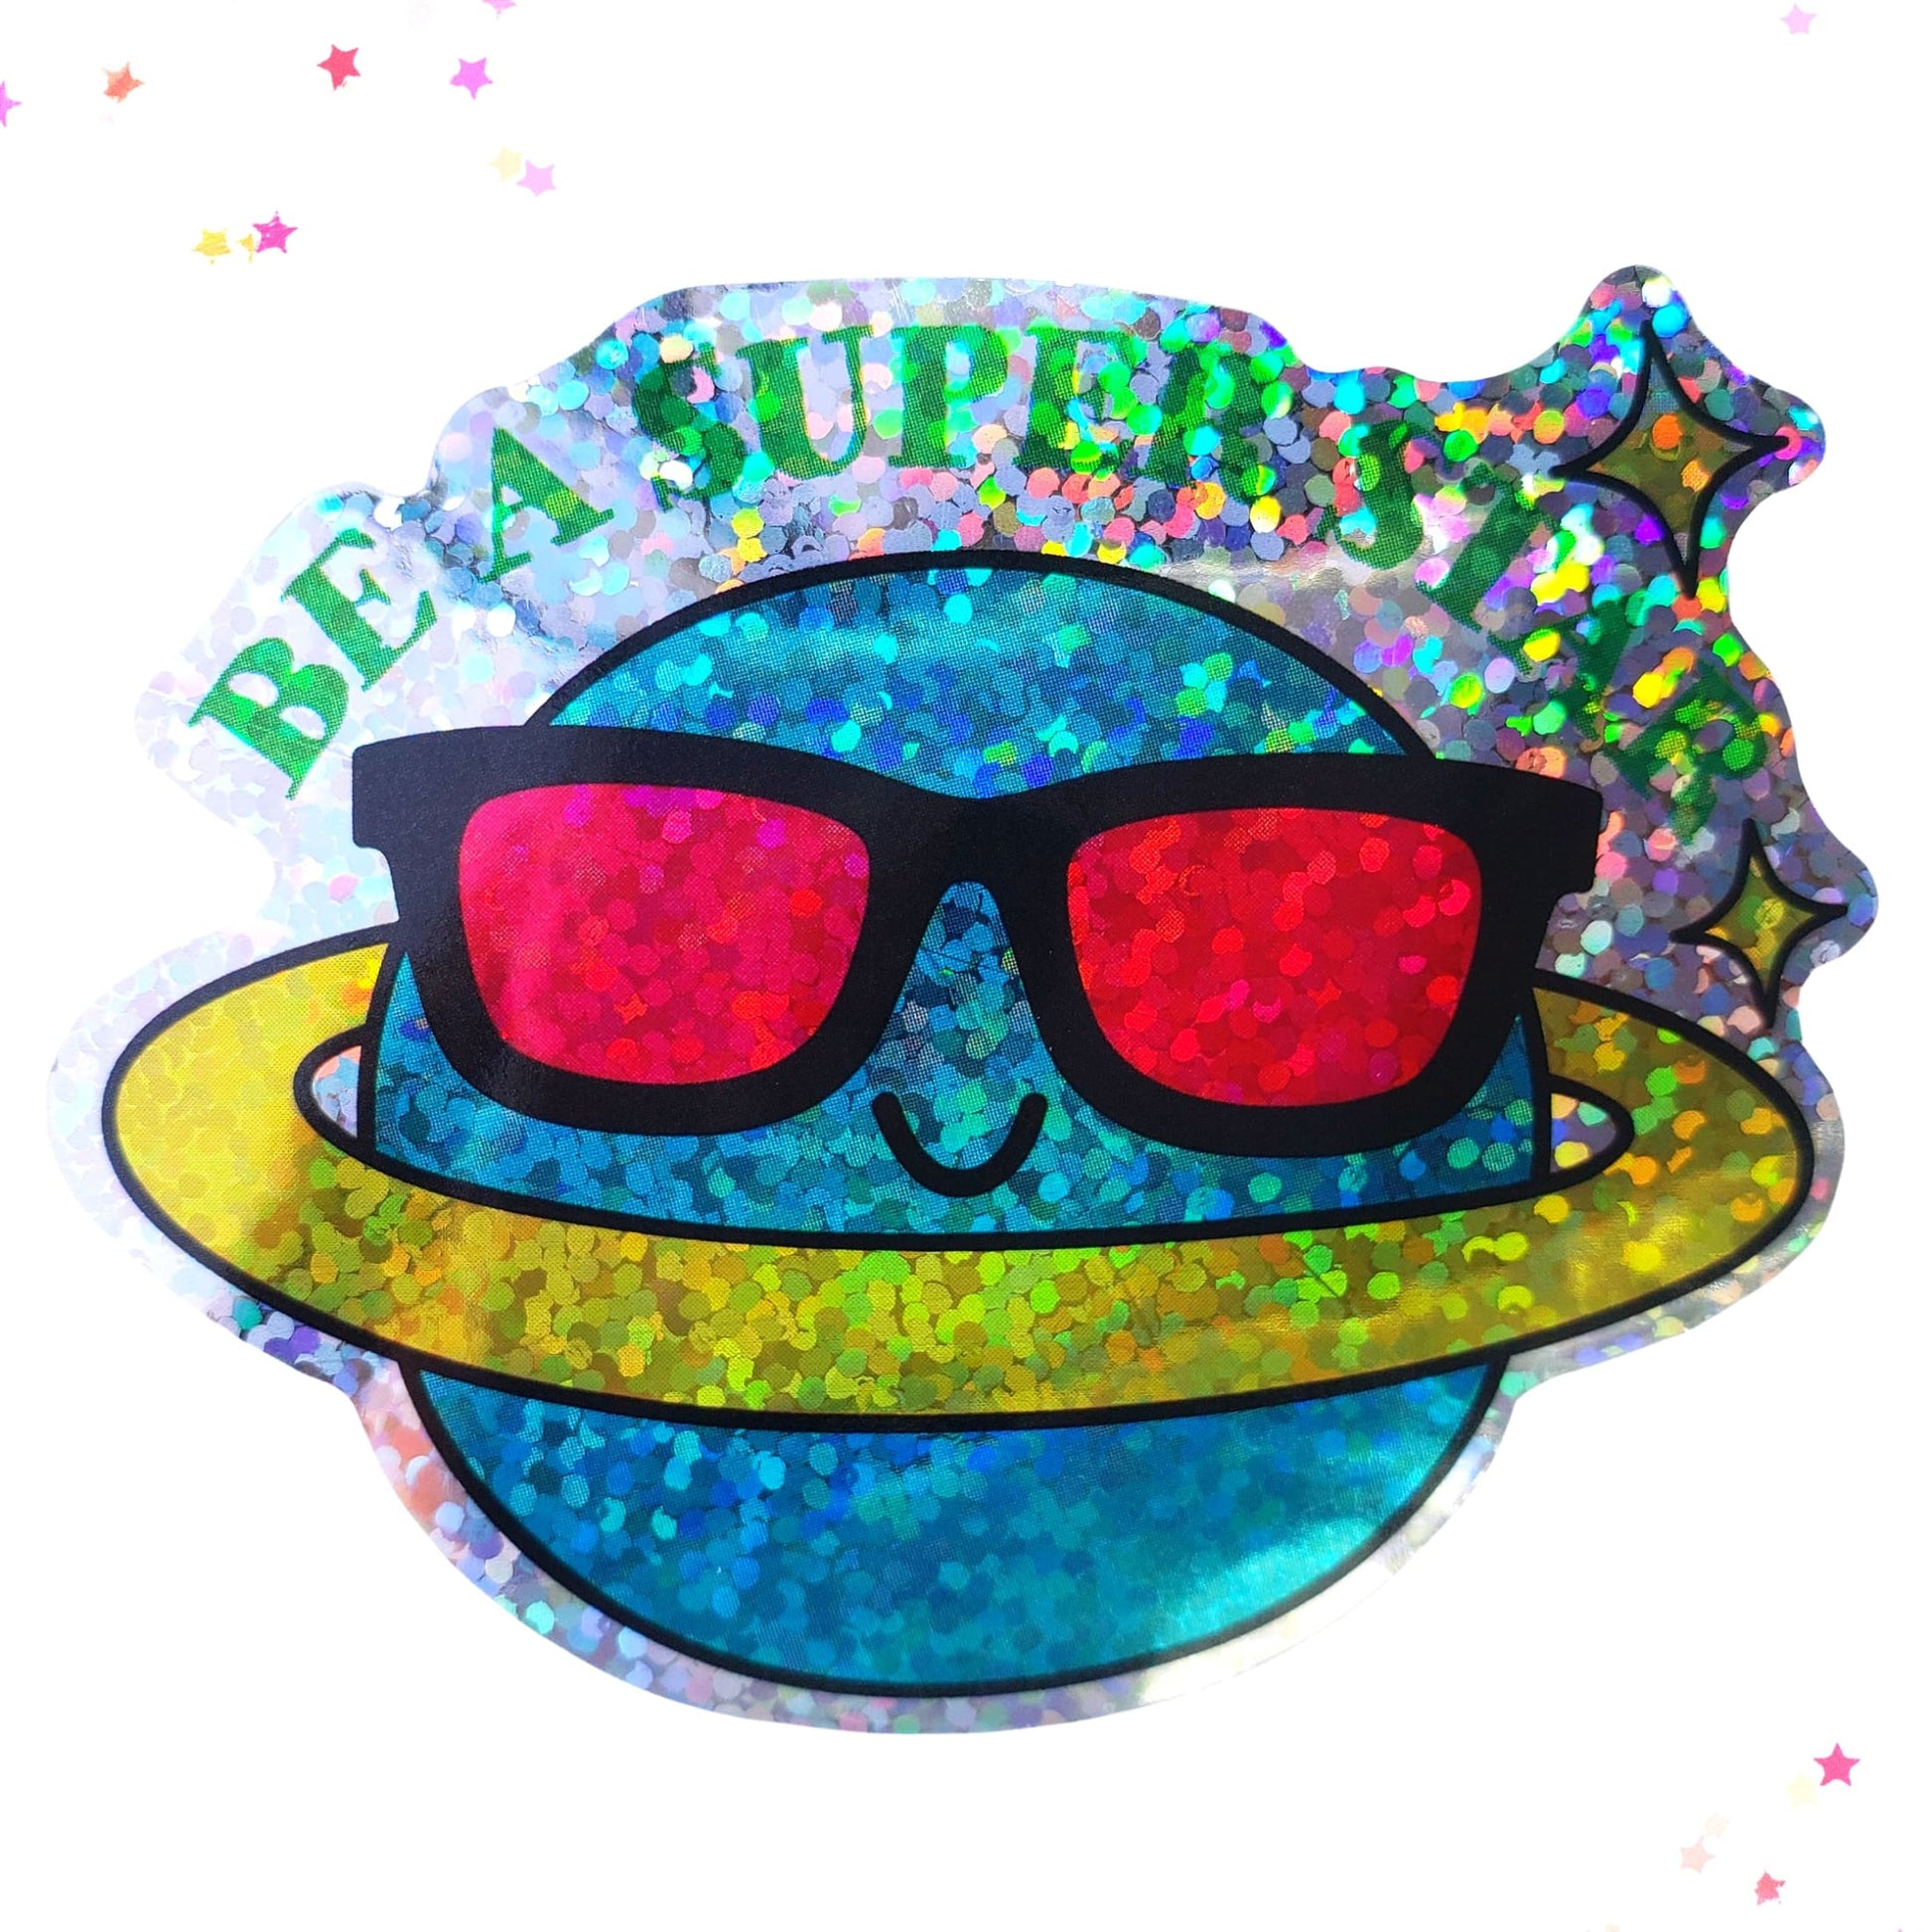 Premium Sticker - Sparkly Holographic Glitter Be A Superstar from Confetti Kitty, Only 2.00